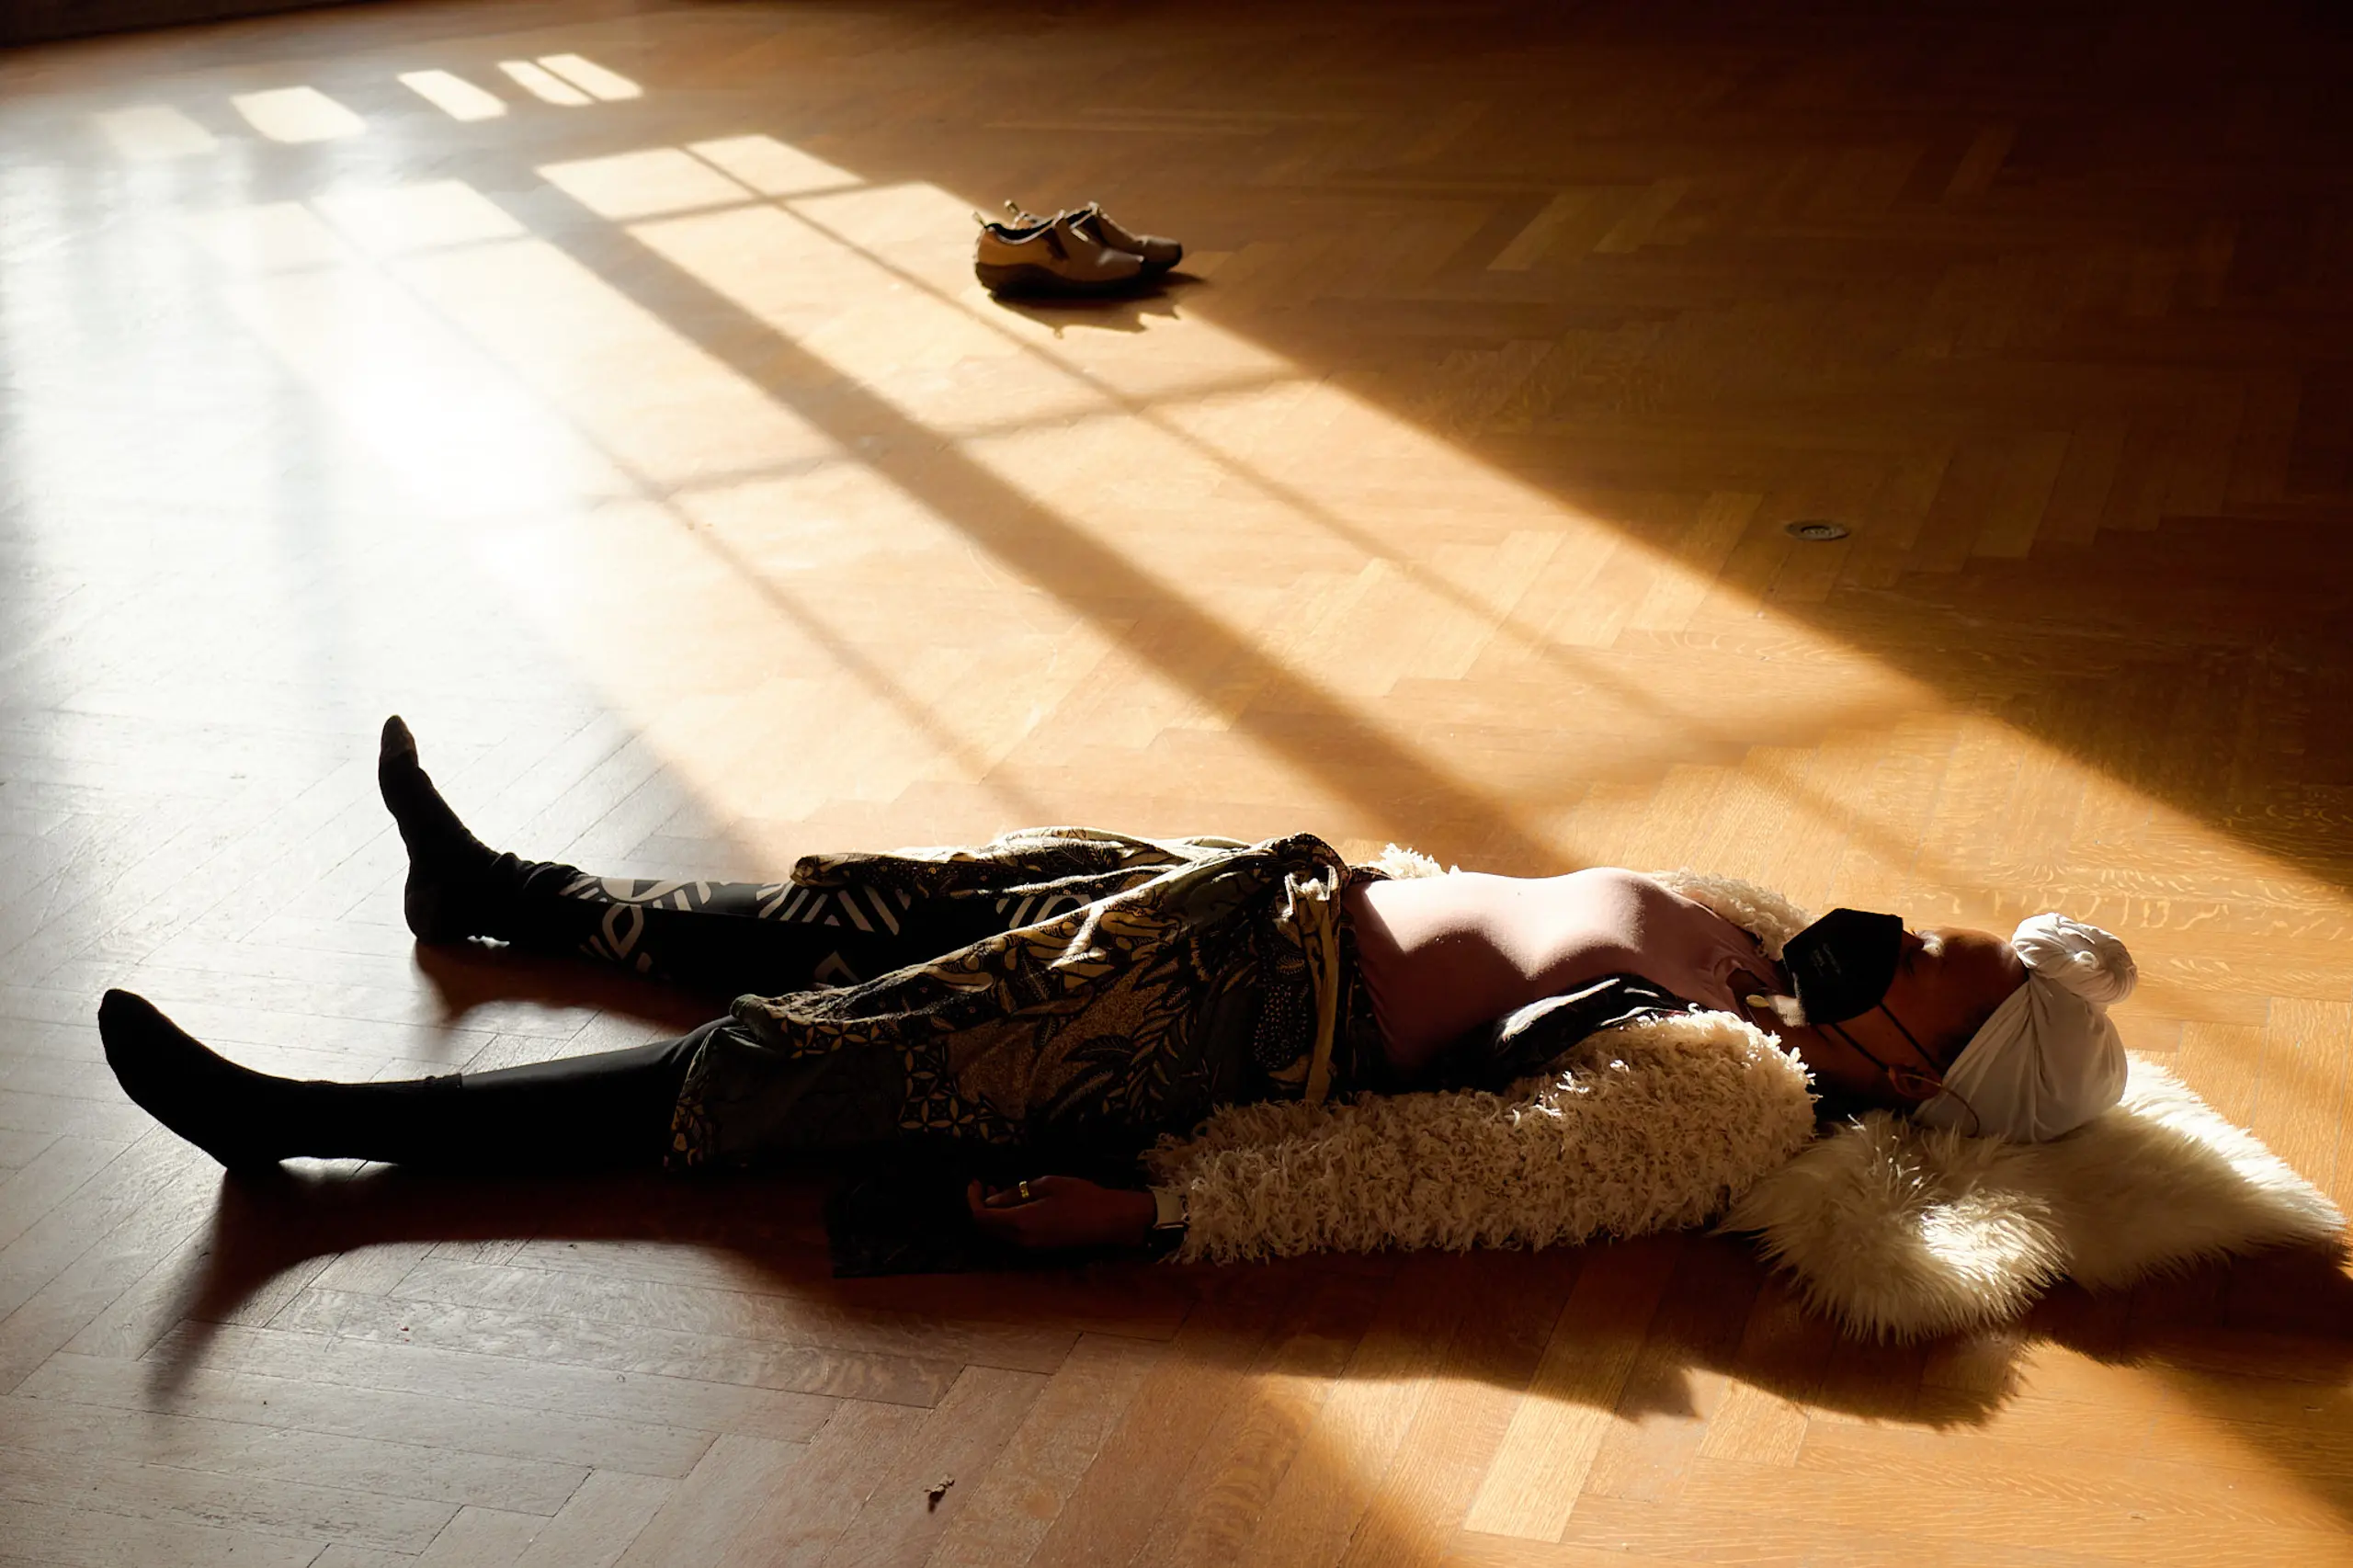 A person with eyes closed lying on her back on a wooden floor; sunlight streams into the room from nearby window